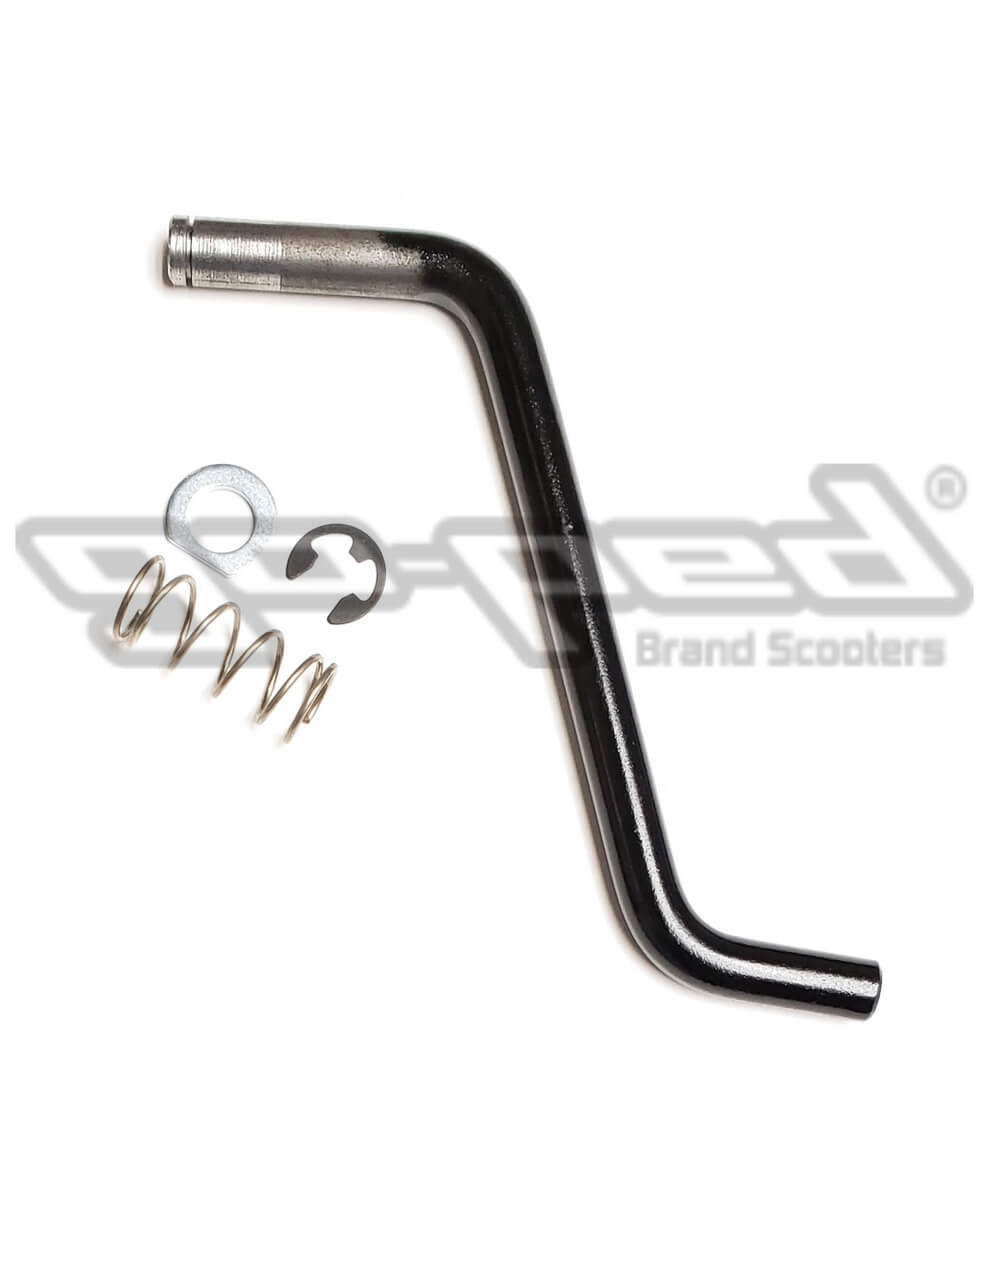 Go-Ped KICKSTAND KIT; MED, 3.5" (8633) for Scooters